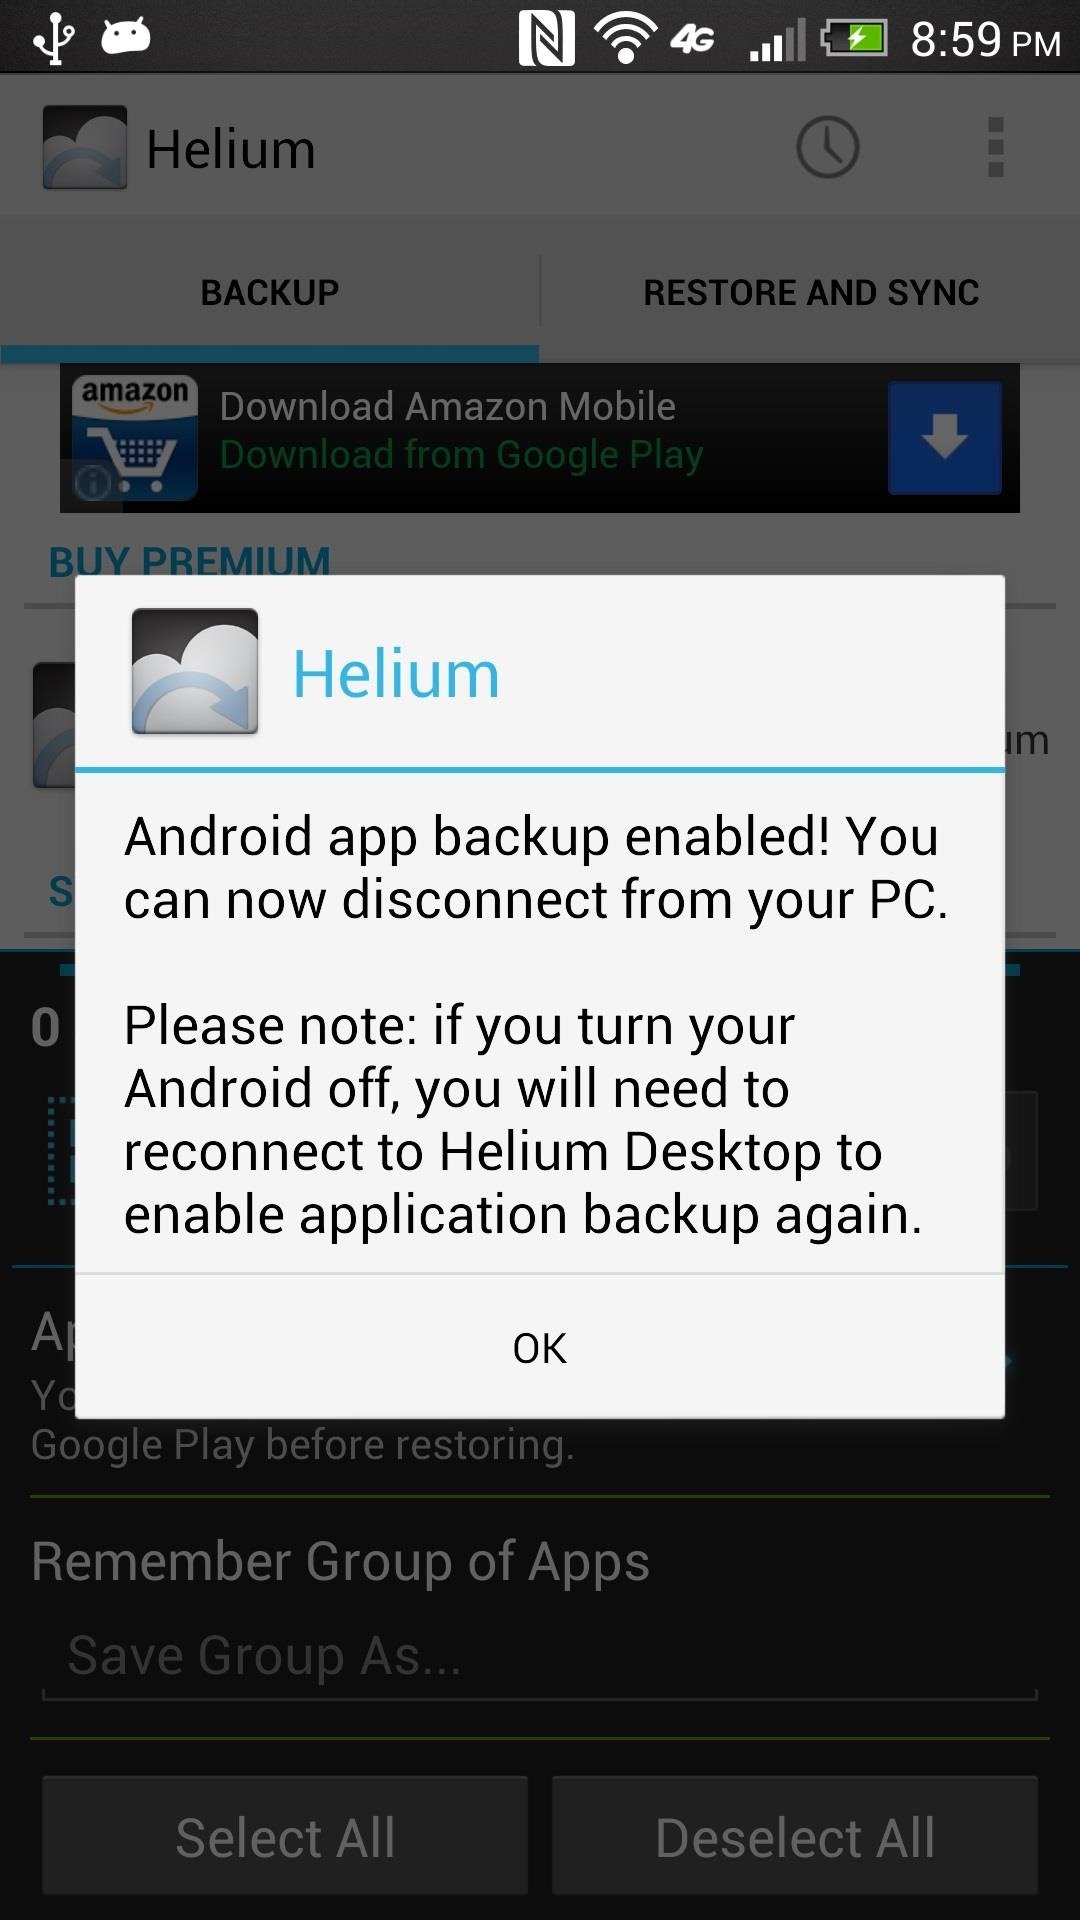 How to Completely Back Up Your Apps & App Data on Your HTC One or Other Android Device